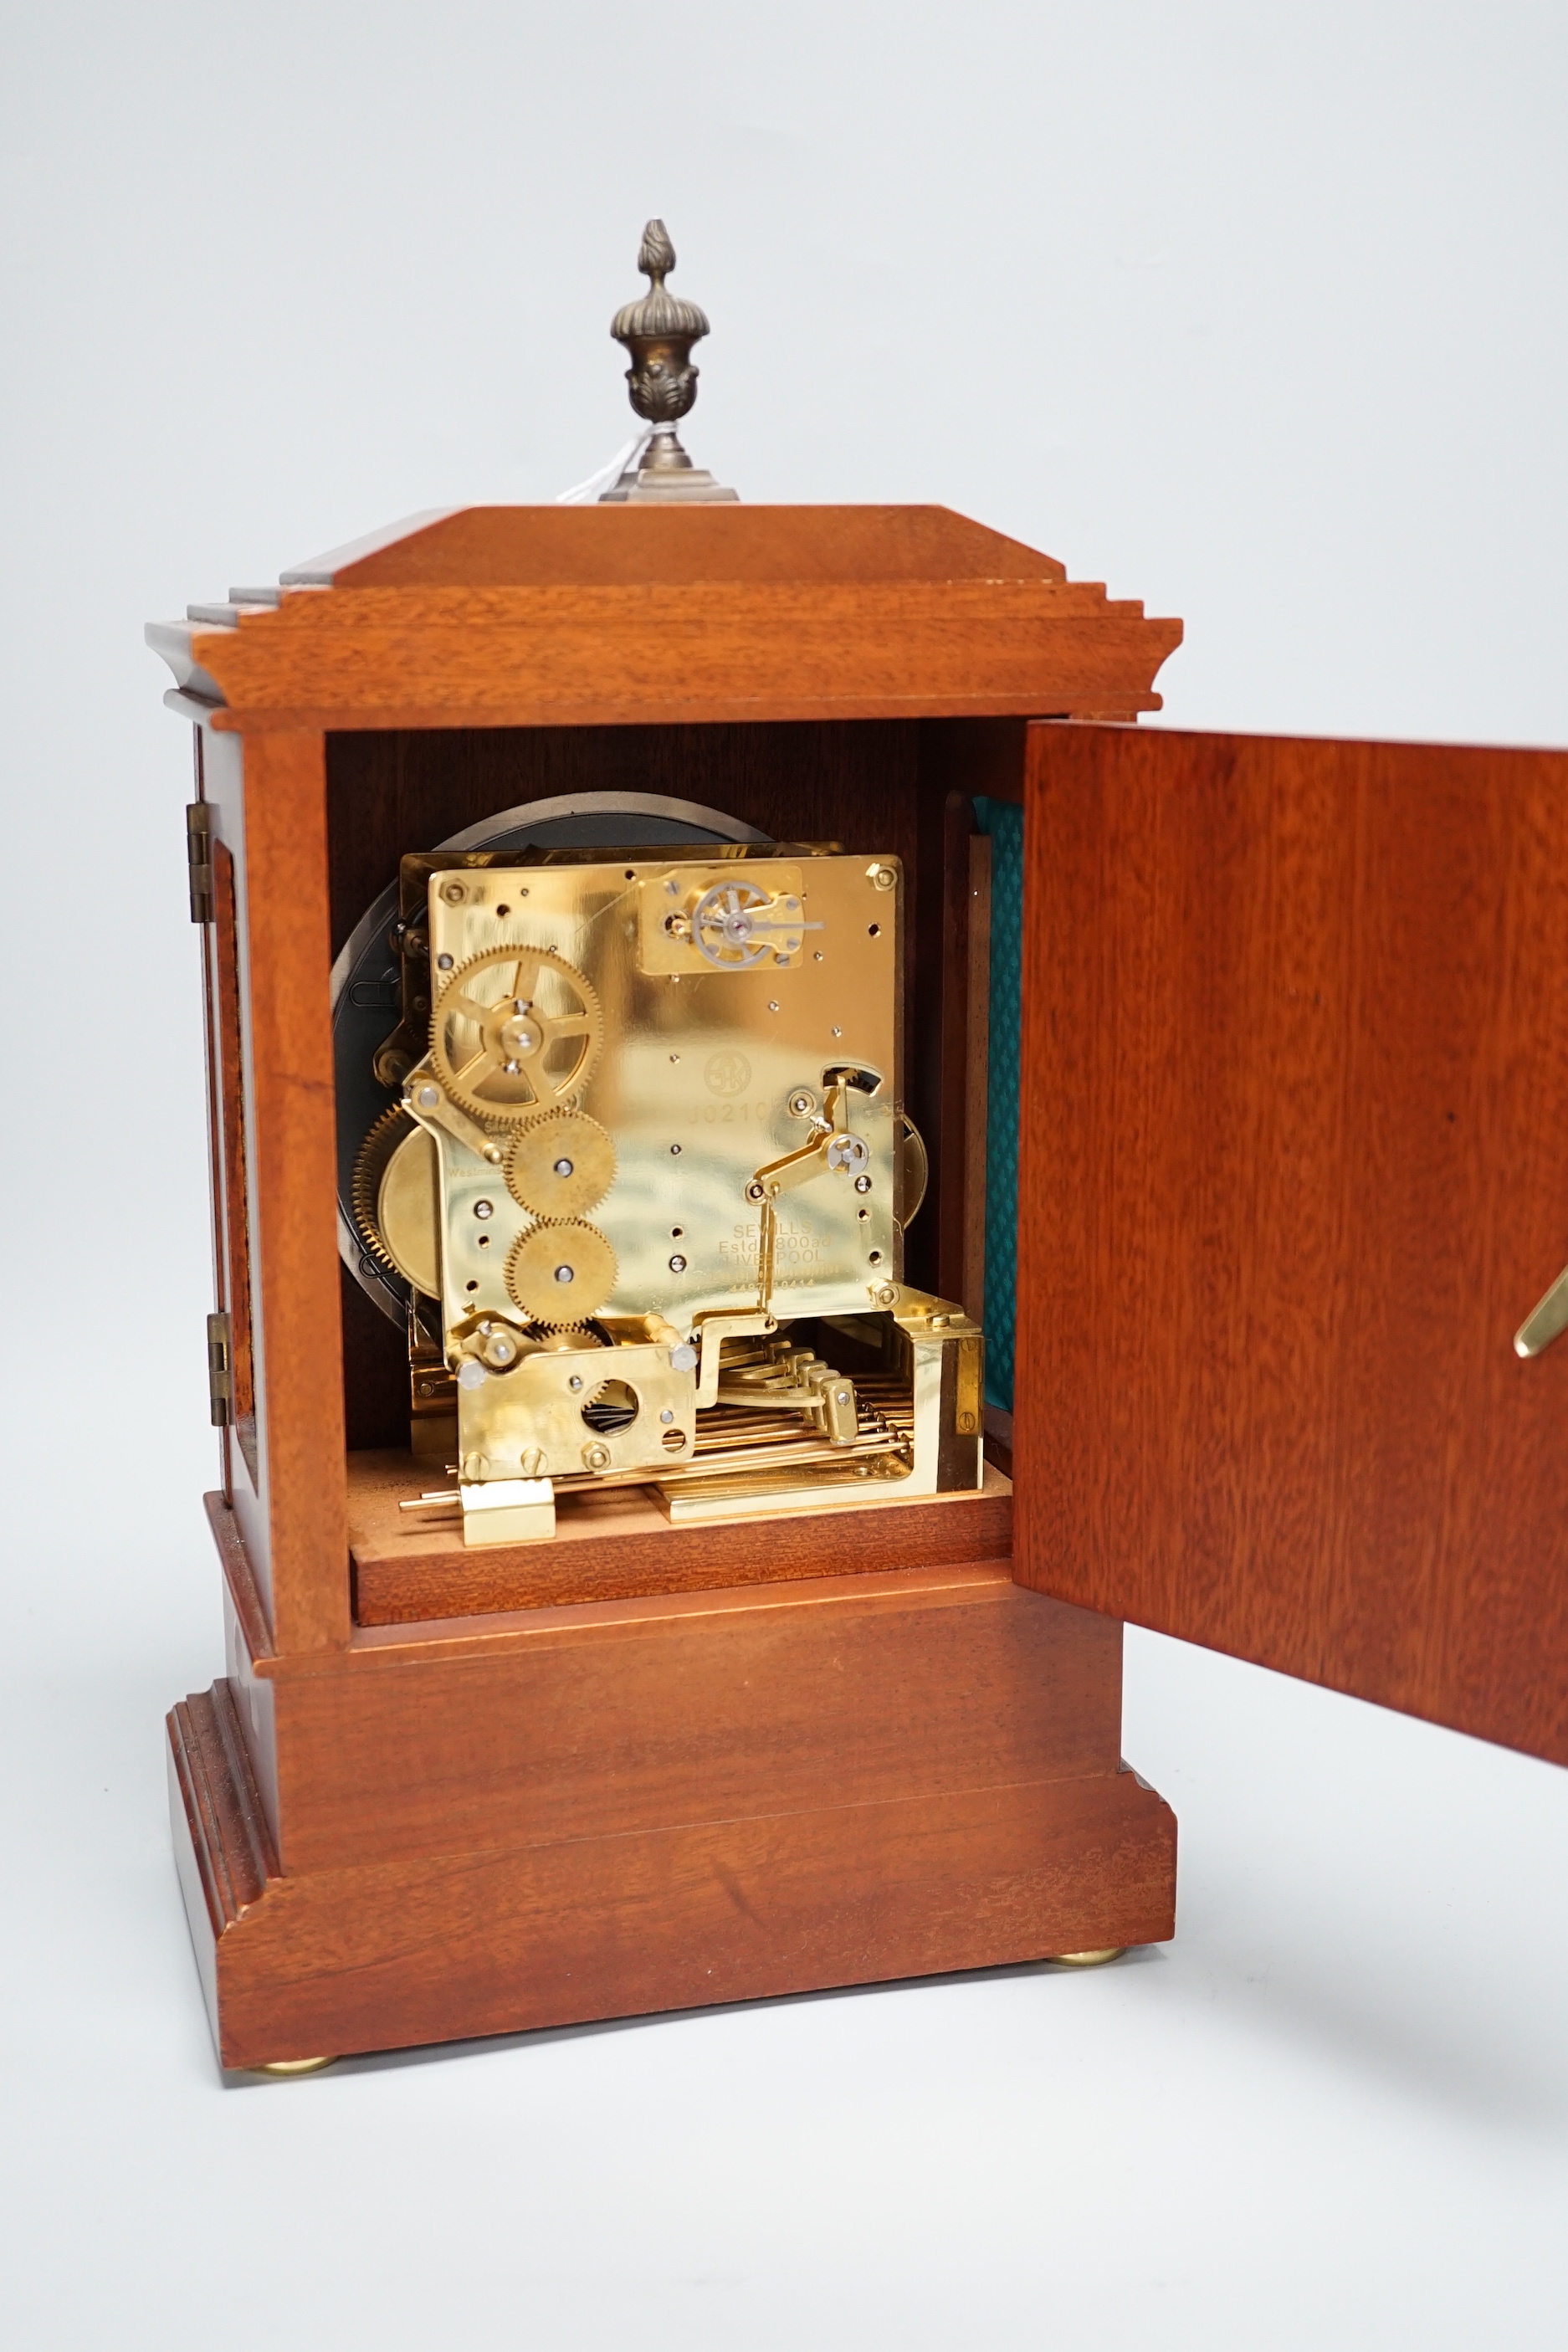 Sewills, Liverpool. An inlaid mantel clock with three train balance escapement movement, chiming - Image 4 of 6